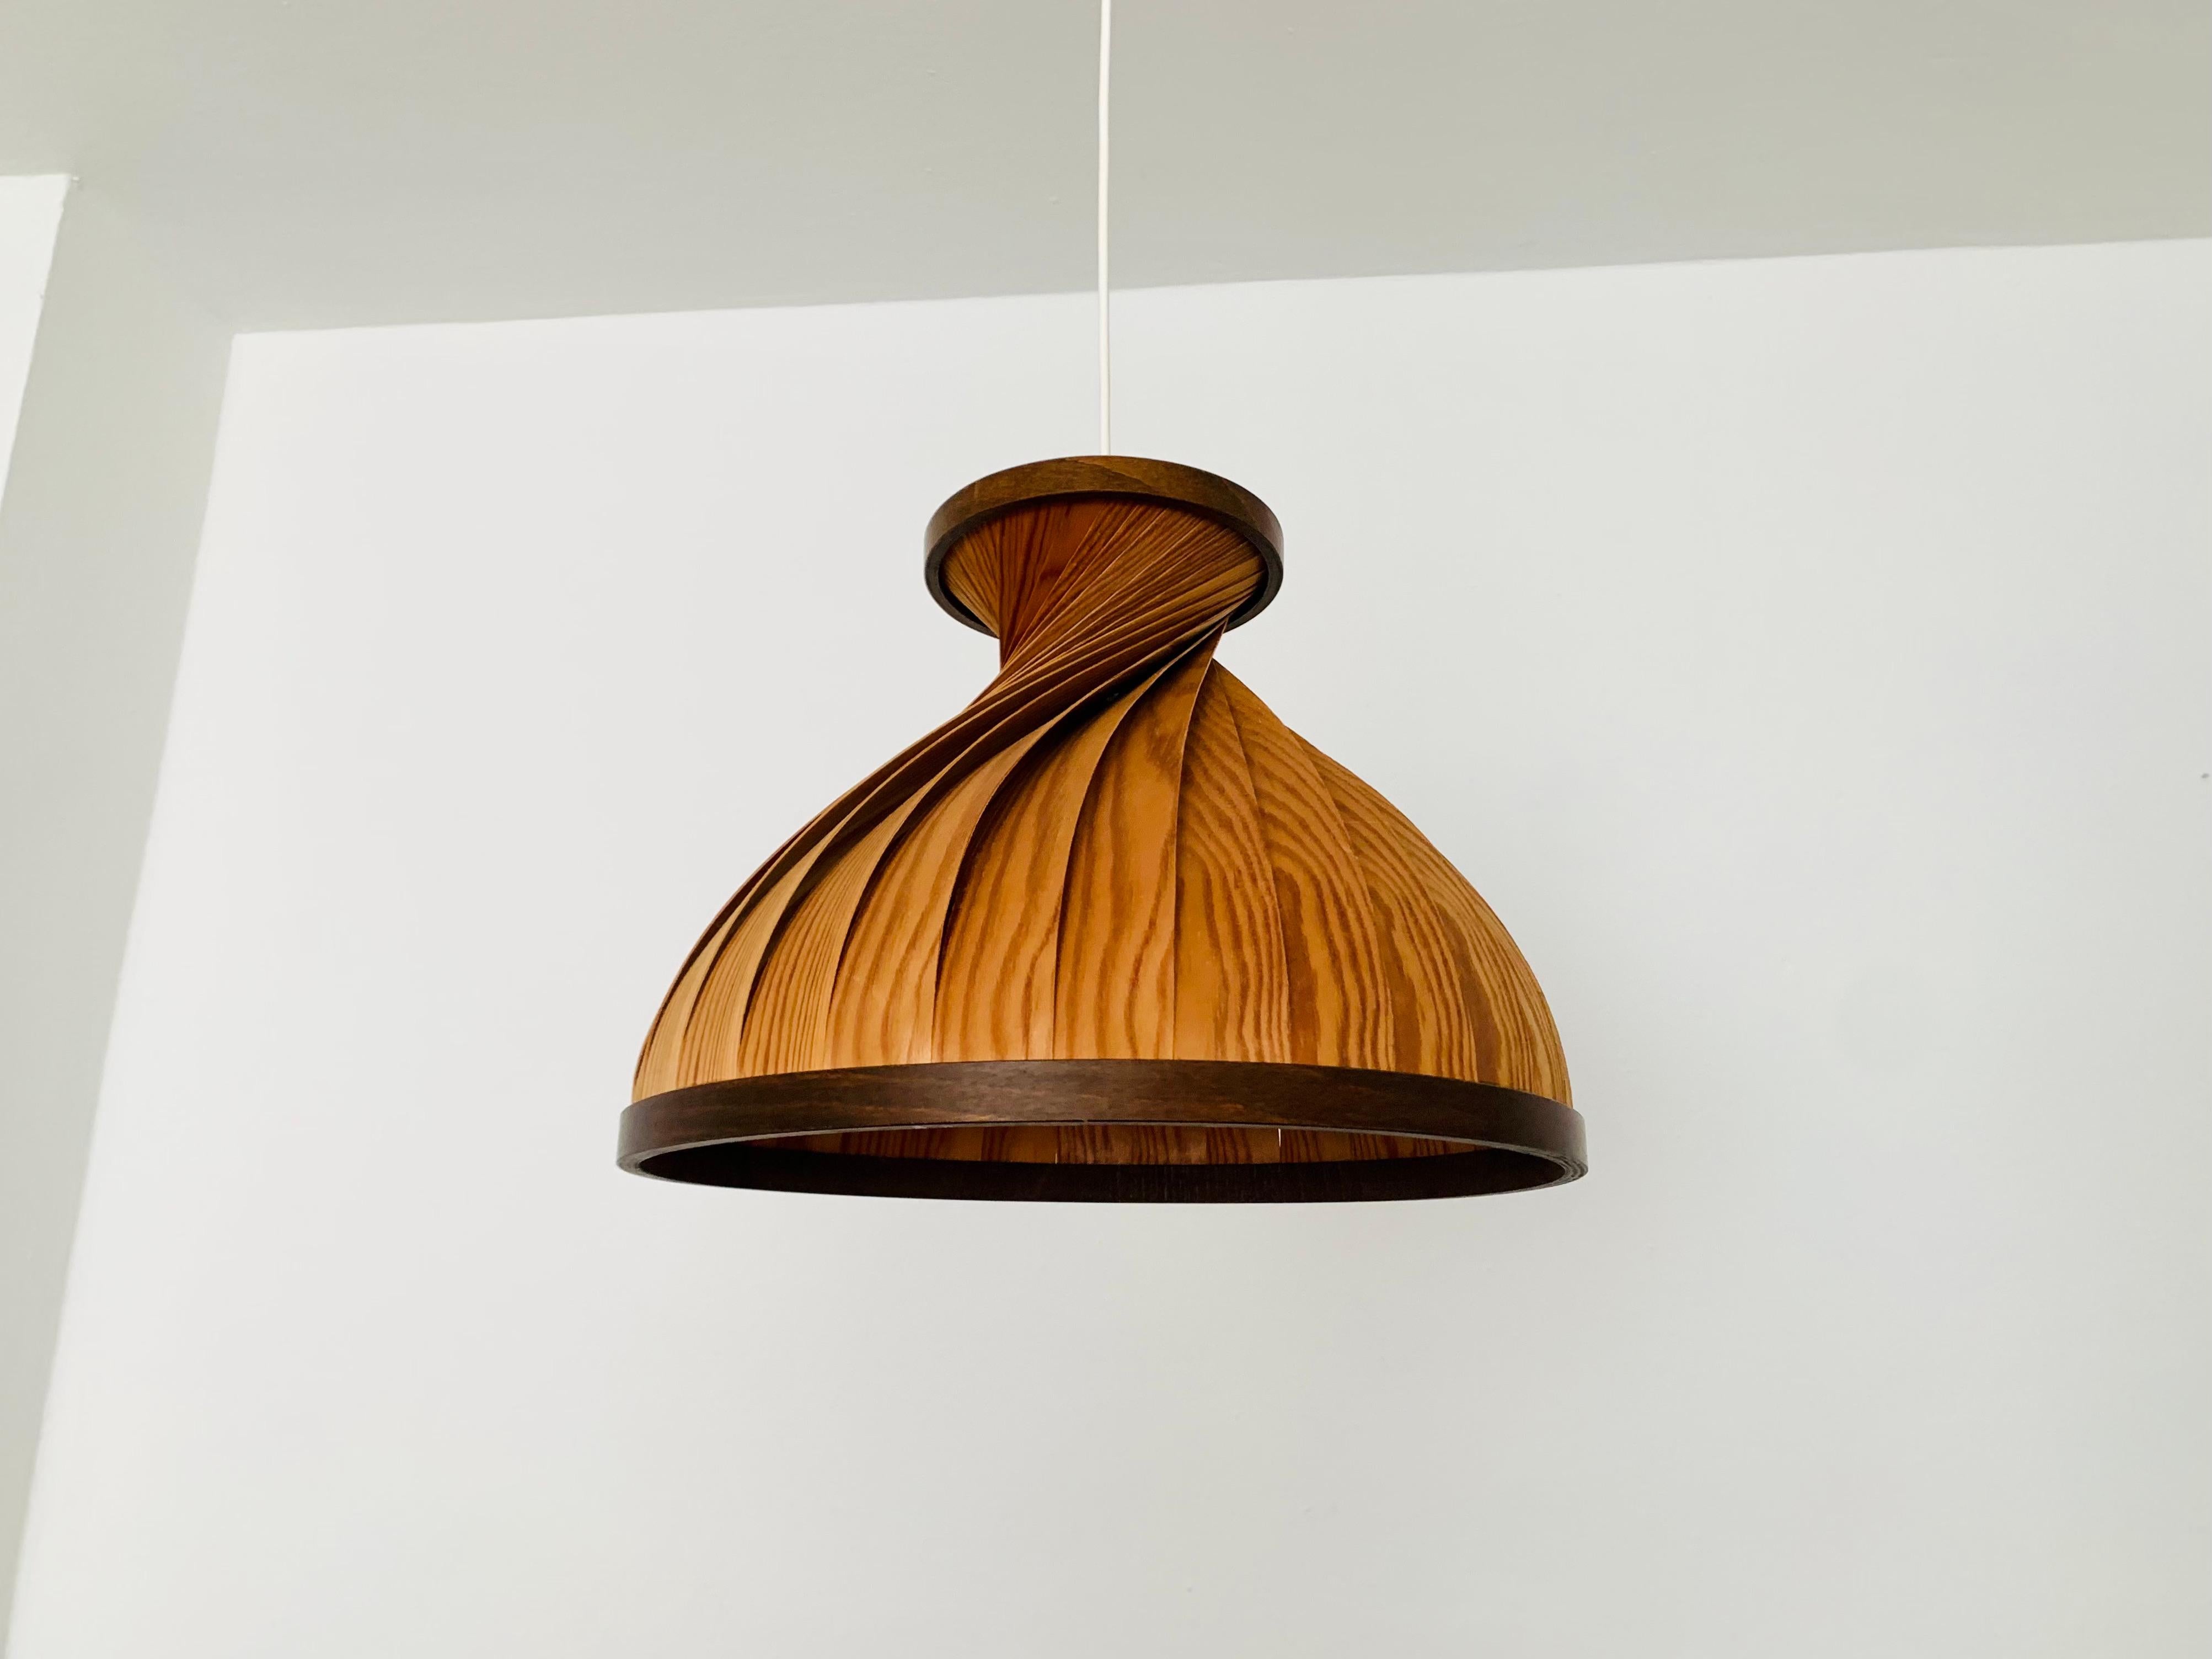 Extraordinarily beautiful wooden pendant lamp from the 1960s.
Loving and high-quality processing.
The design and the material create a very warm and pleasant light.

Condition:

Very good vintage condition with slight signs of wear consistent